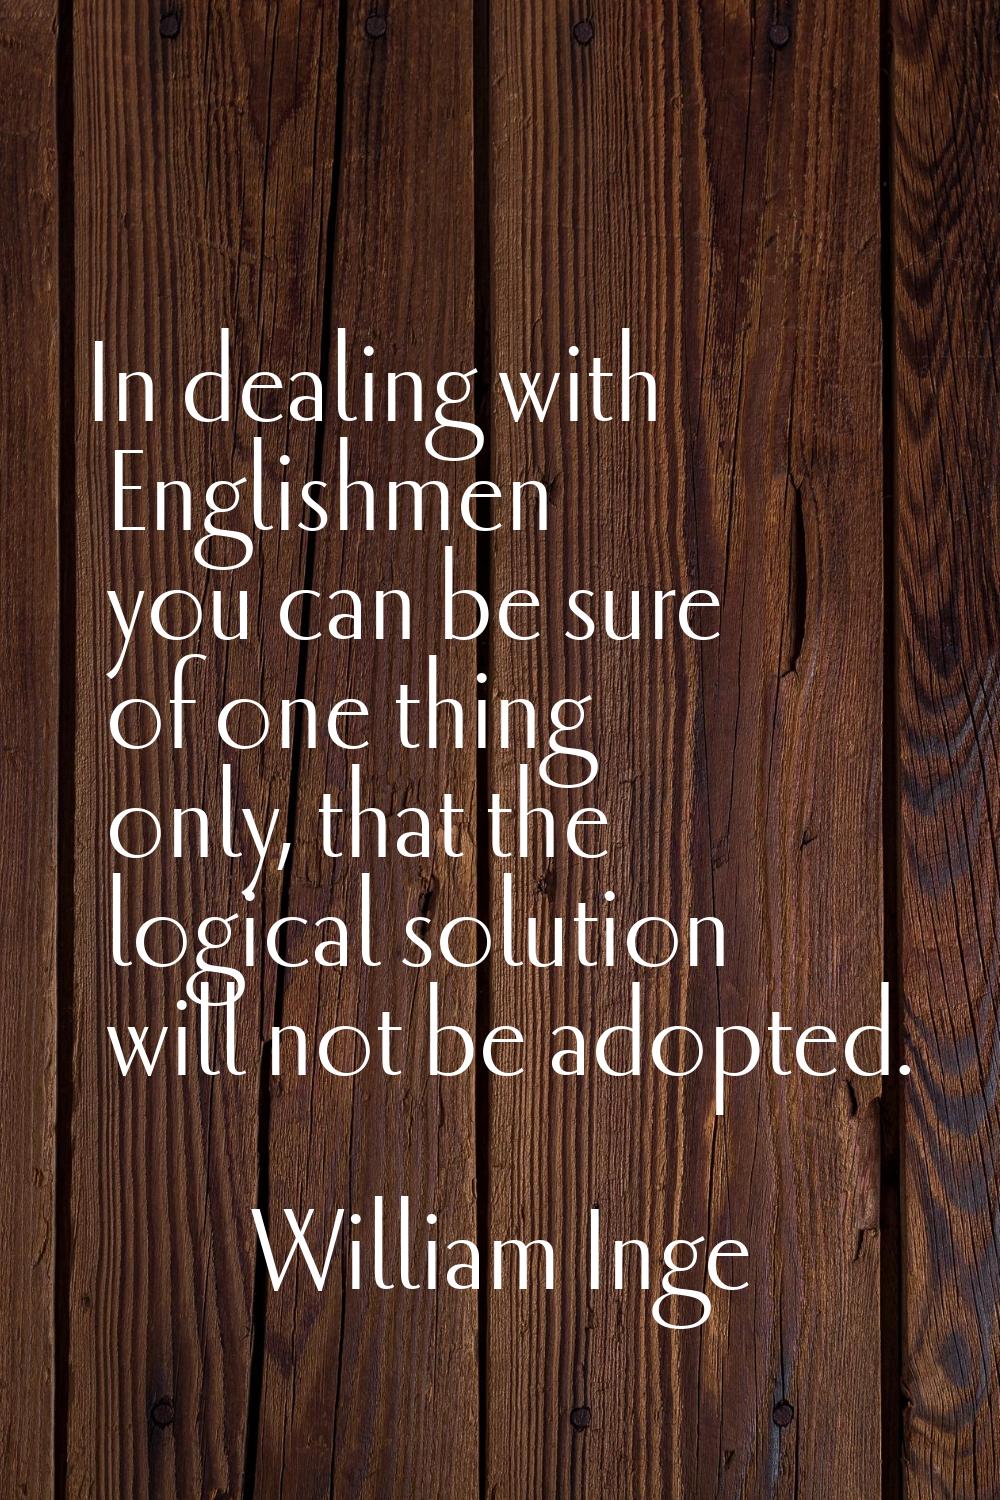 In dealing with Englishmen you can be sure of one thing only, that the logical solution will not be